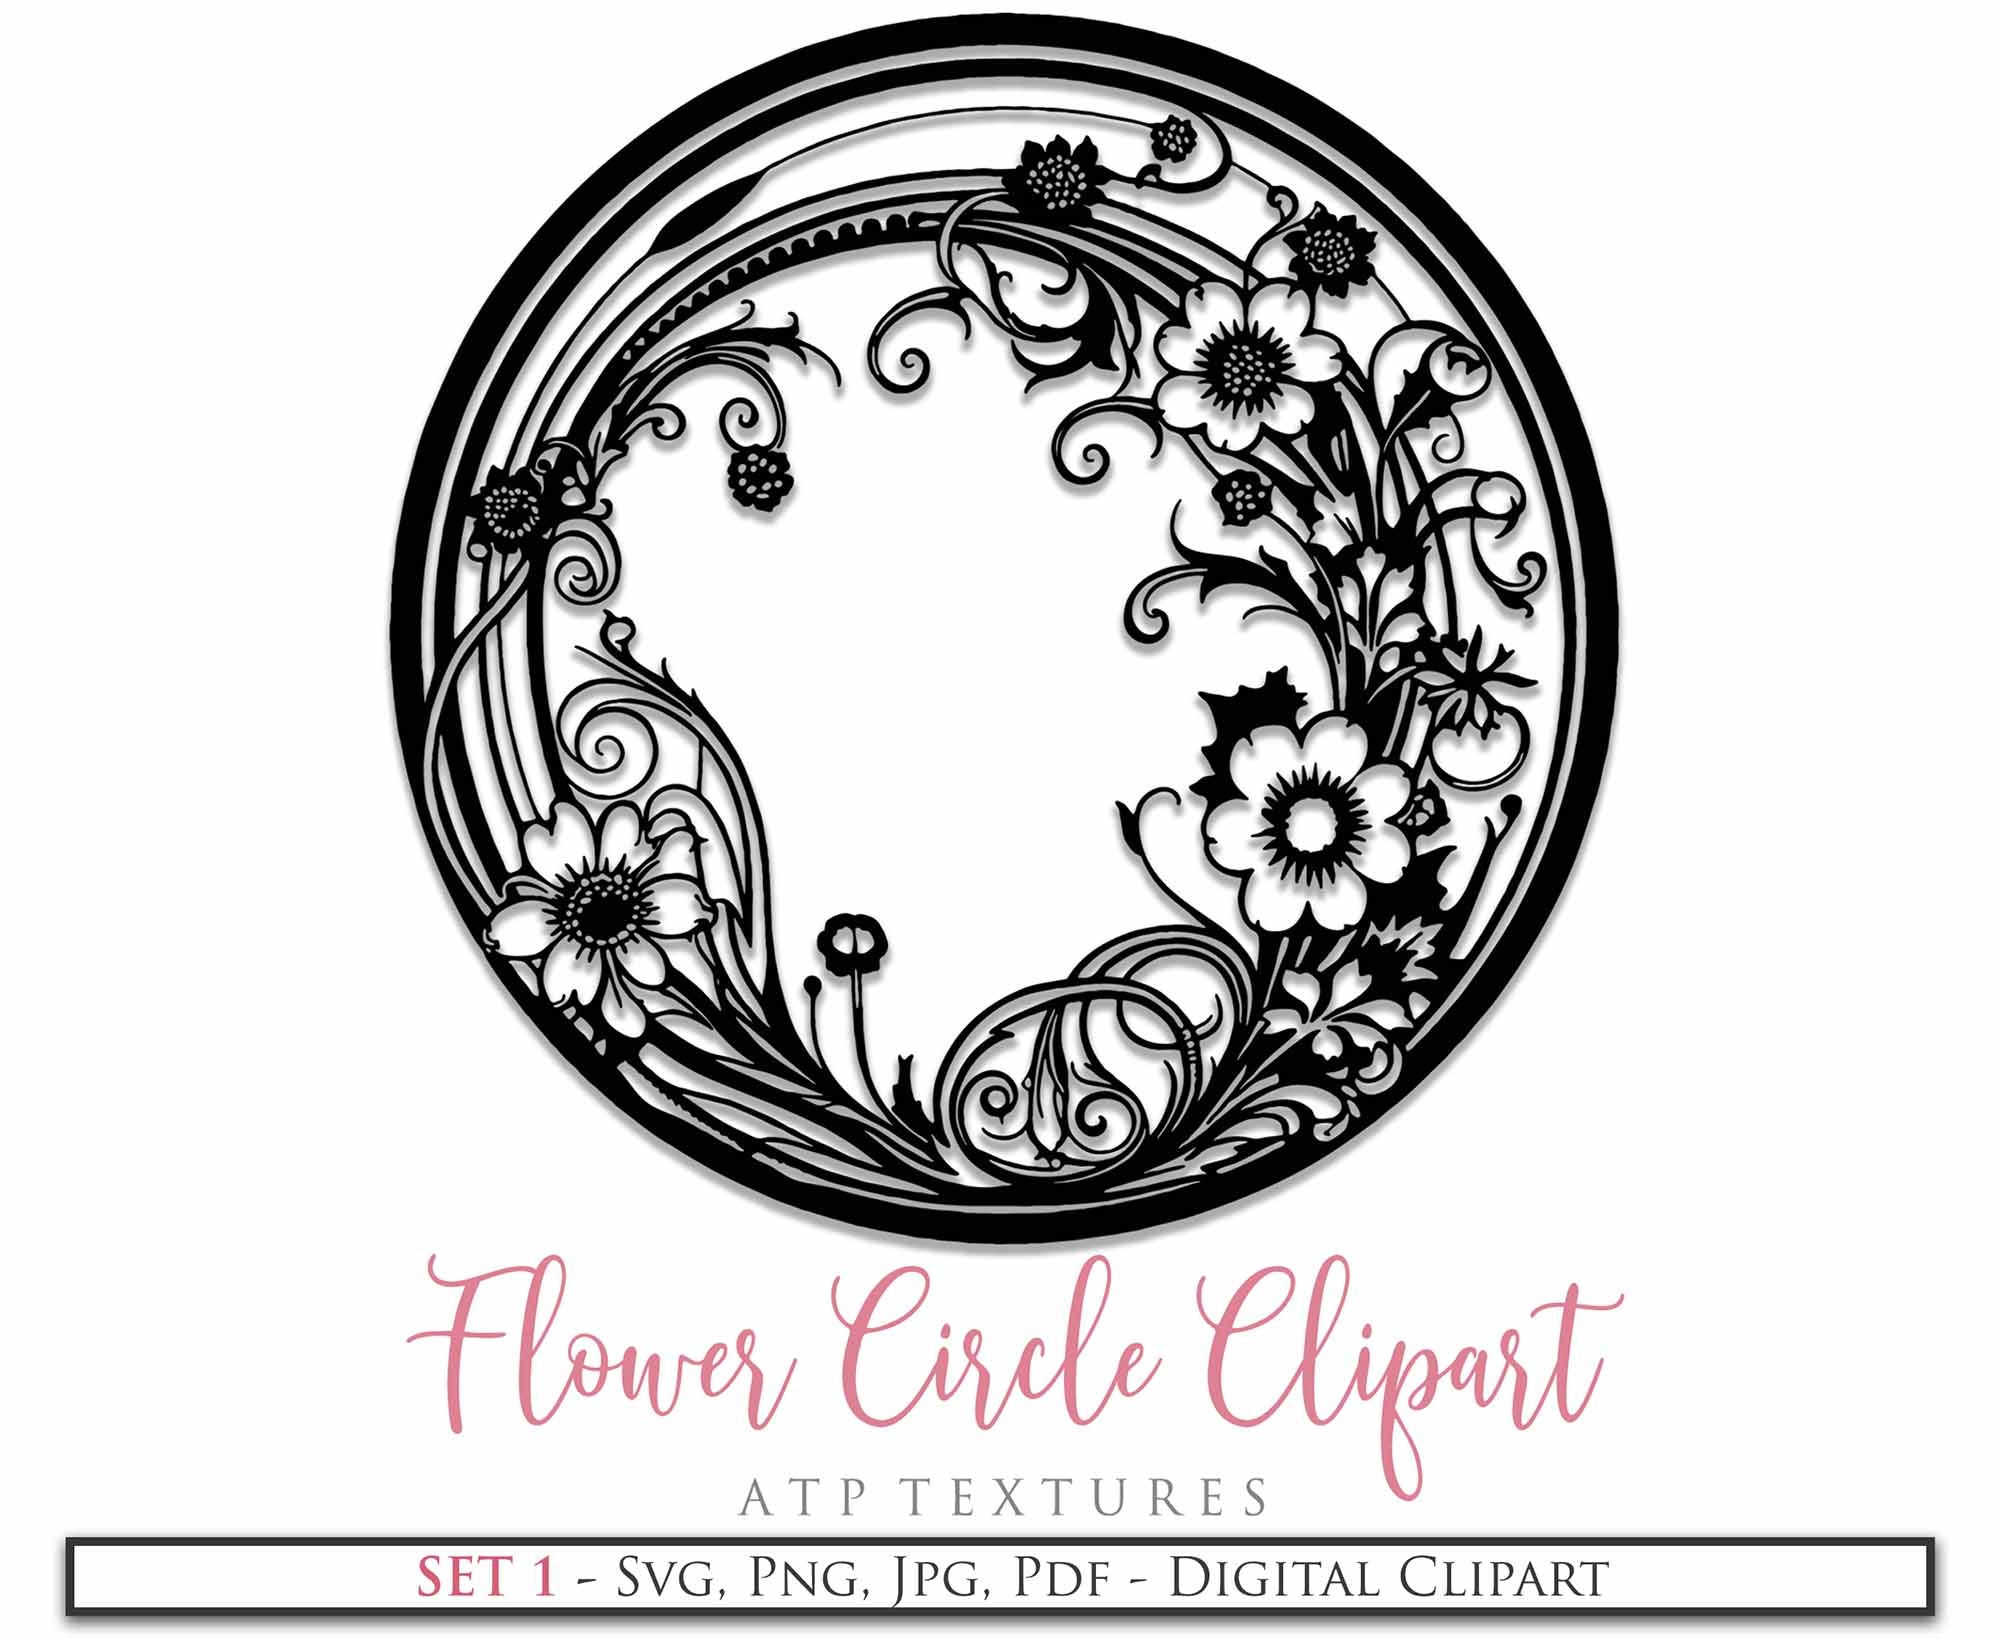 Svg Flower Circle Clipart. Svg, Png Clipart for Cricut or Silhouette Cameo. Sublimation art.  Cut or Print. High resolution files.